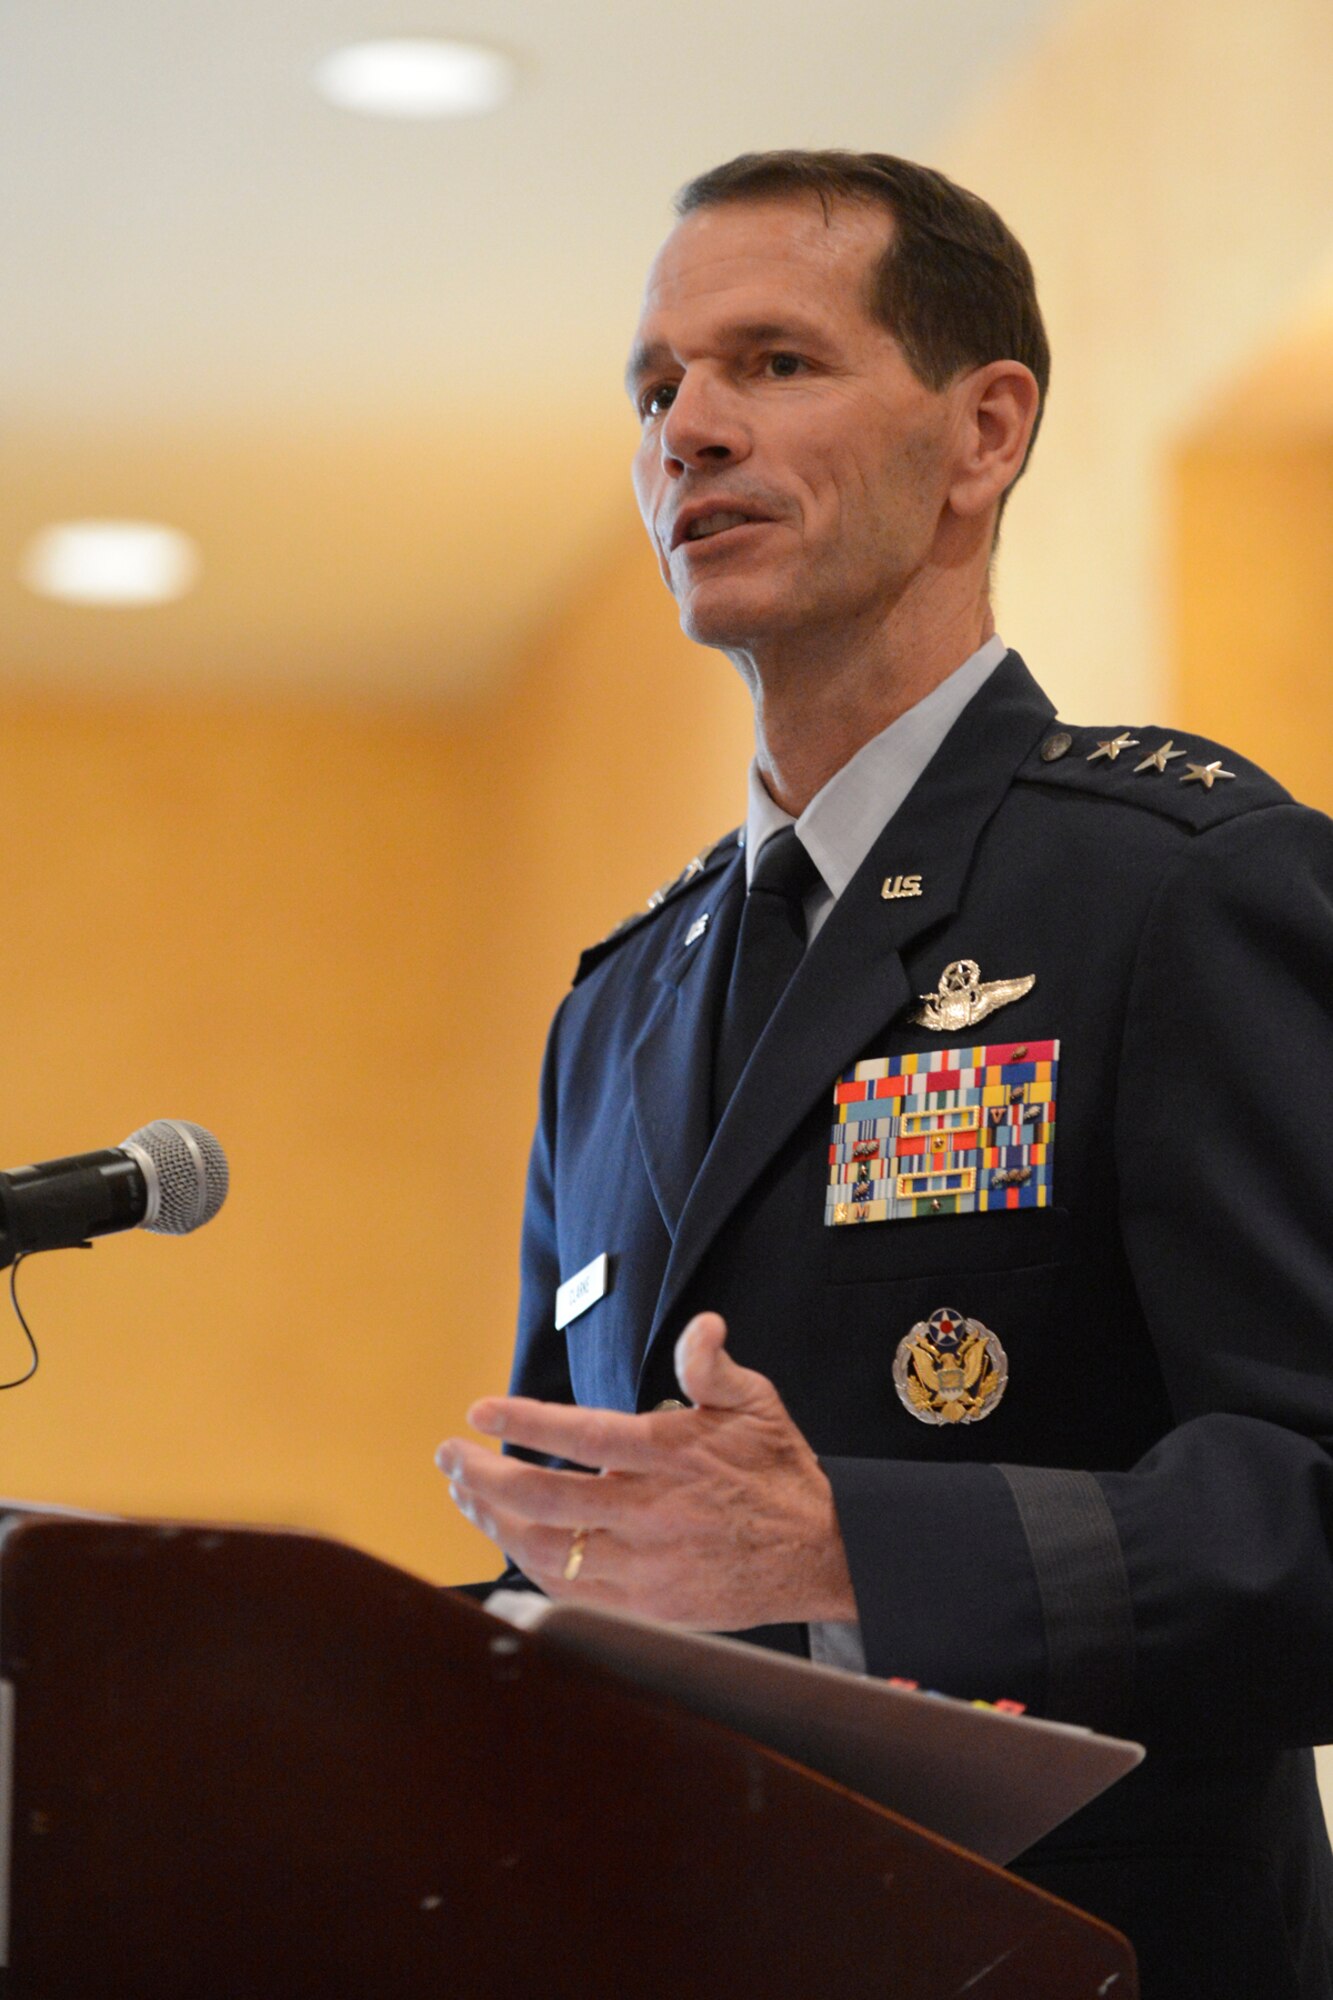 Lt. Gen. Stanley E. Clarke III, the director of the Air National Guard addresses the audience during the 2013 Military Spouse of the Year award ceremony, in Arlington, Va., May 9, 2013. Alicia Hinds Ward, 2013 National Guard Spouse of the Year, won the 2013 Military Spouse of the Year award. The award, presented by Military Spouse magazine and sponsored by Armed Forces Insurance, honors spouses of military members. (Air Force photo by Scott Ash/RELEASED)